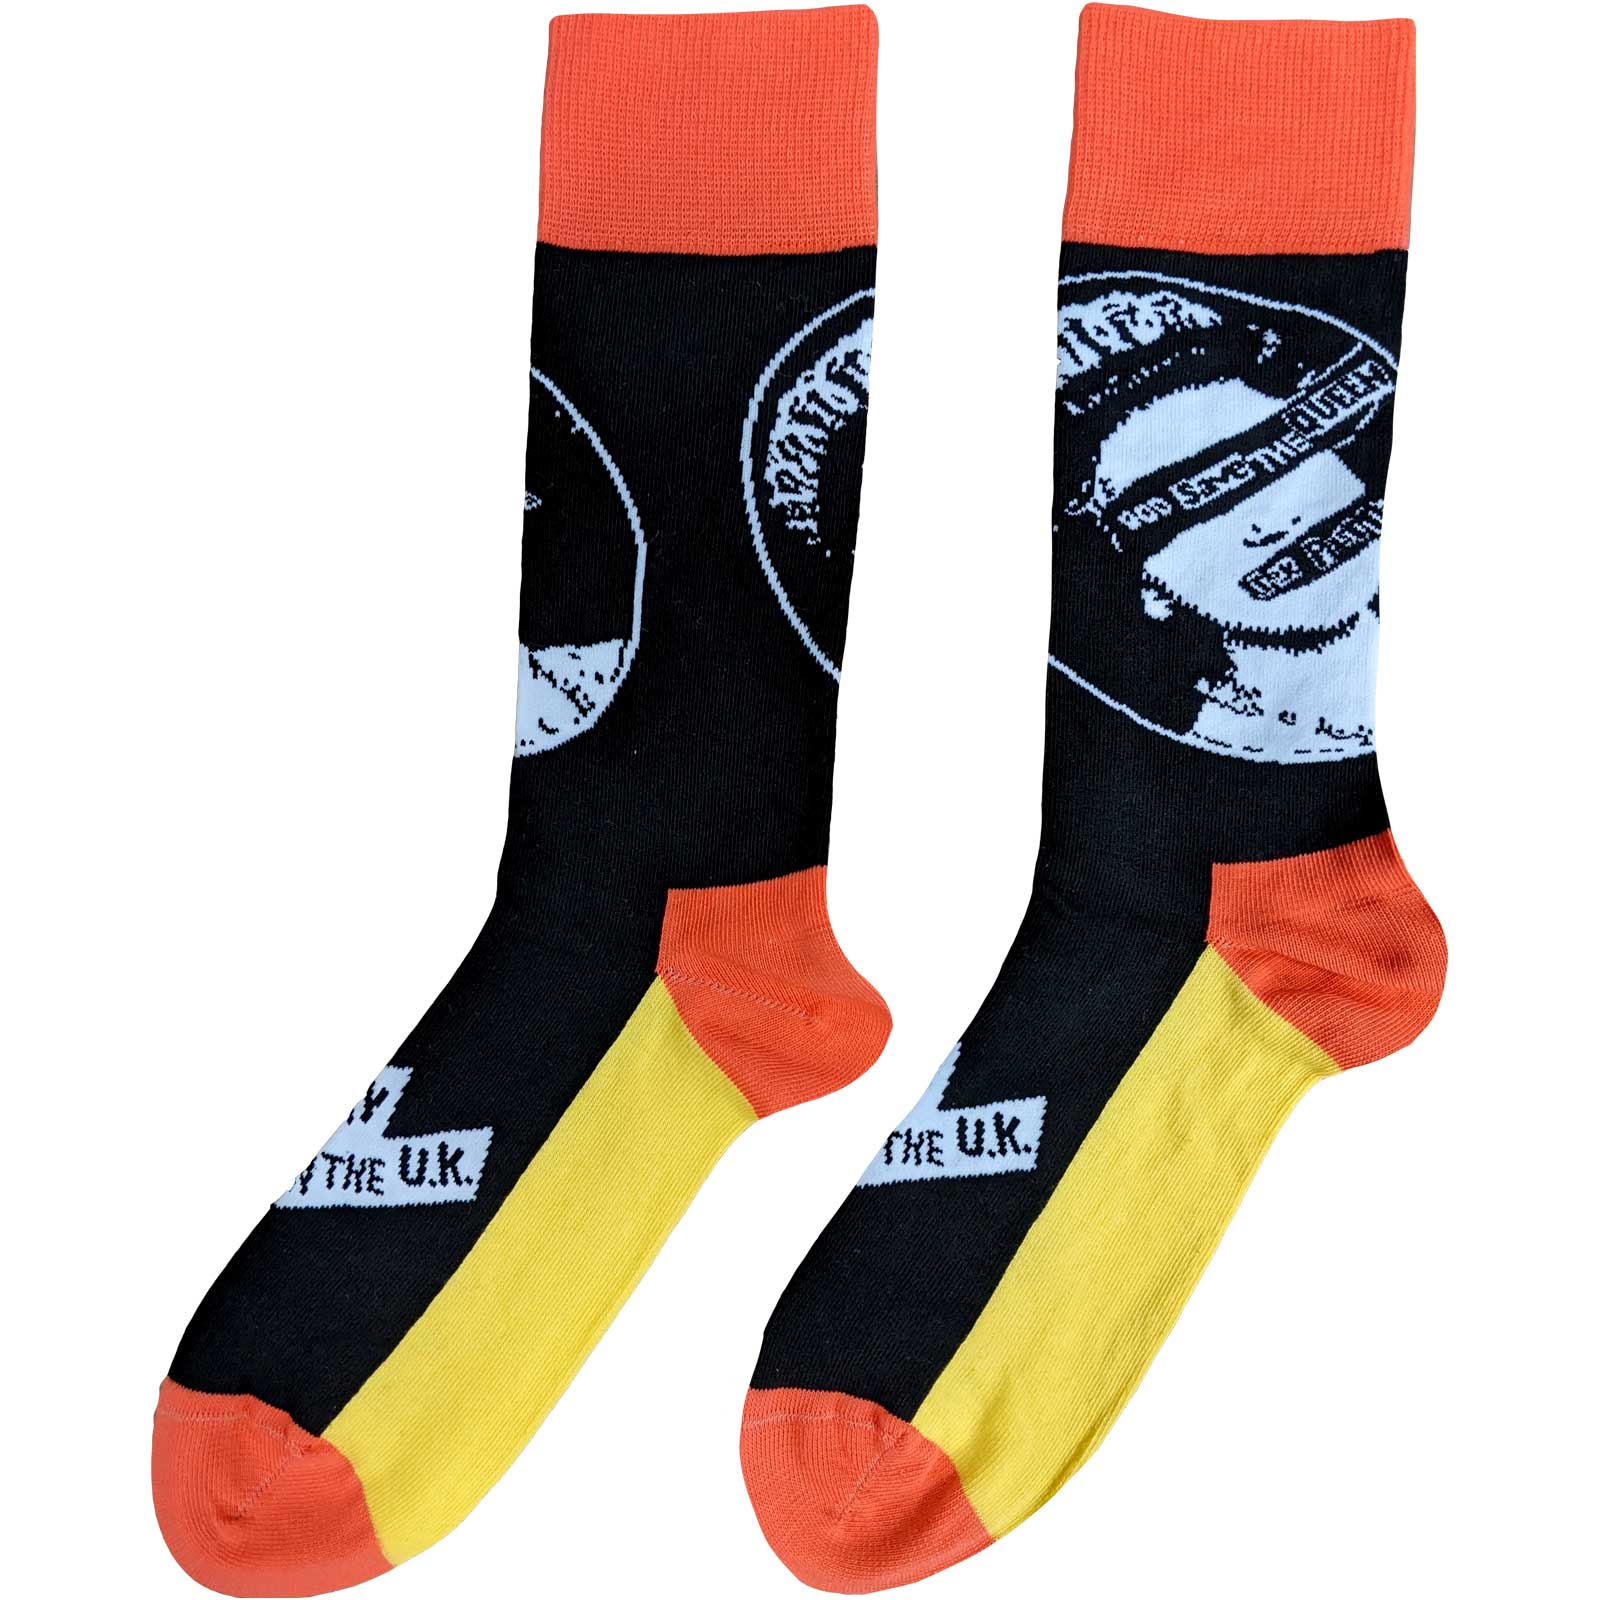 Sex Pistols - Crew Socks (Fits Sizes 7 to 11) - God Save The Queen